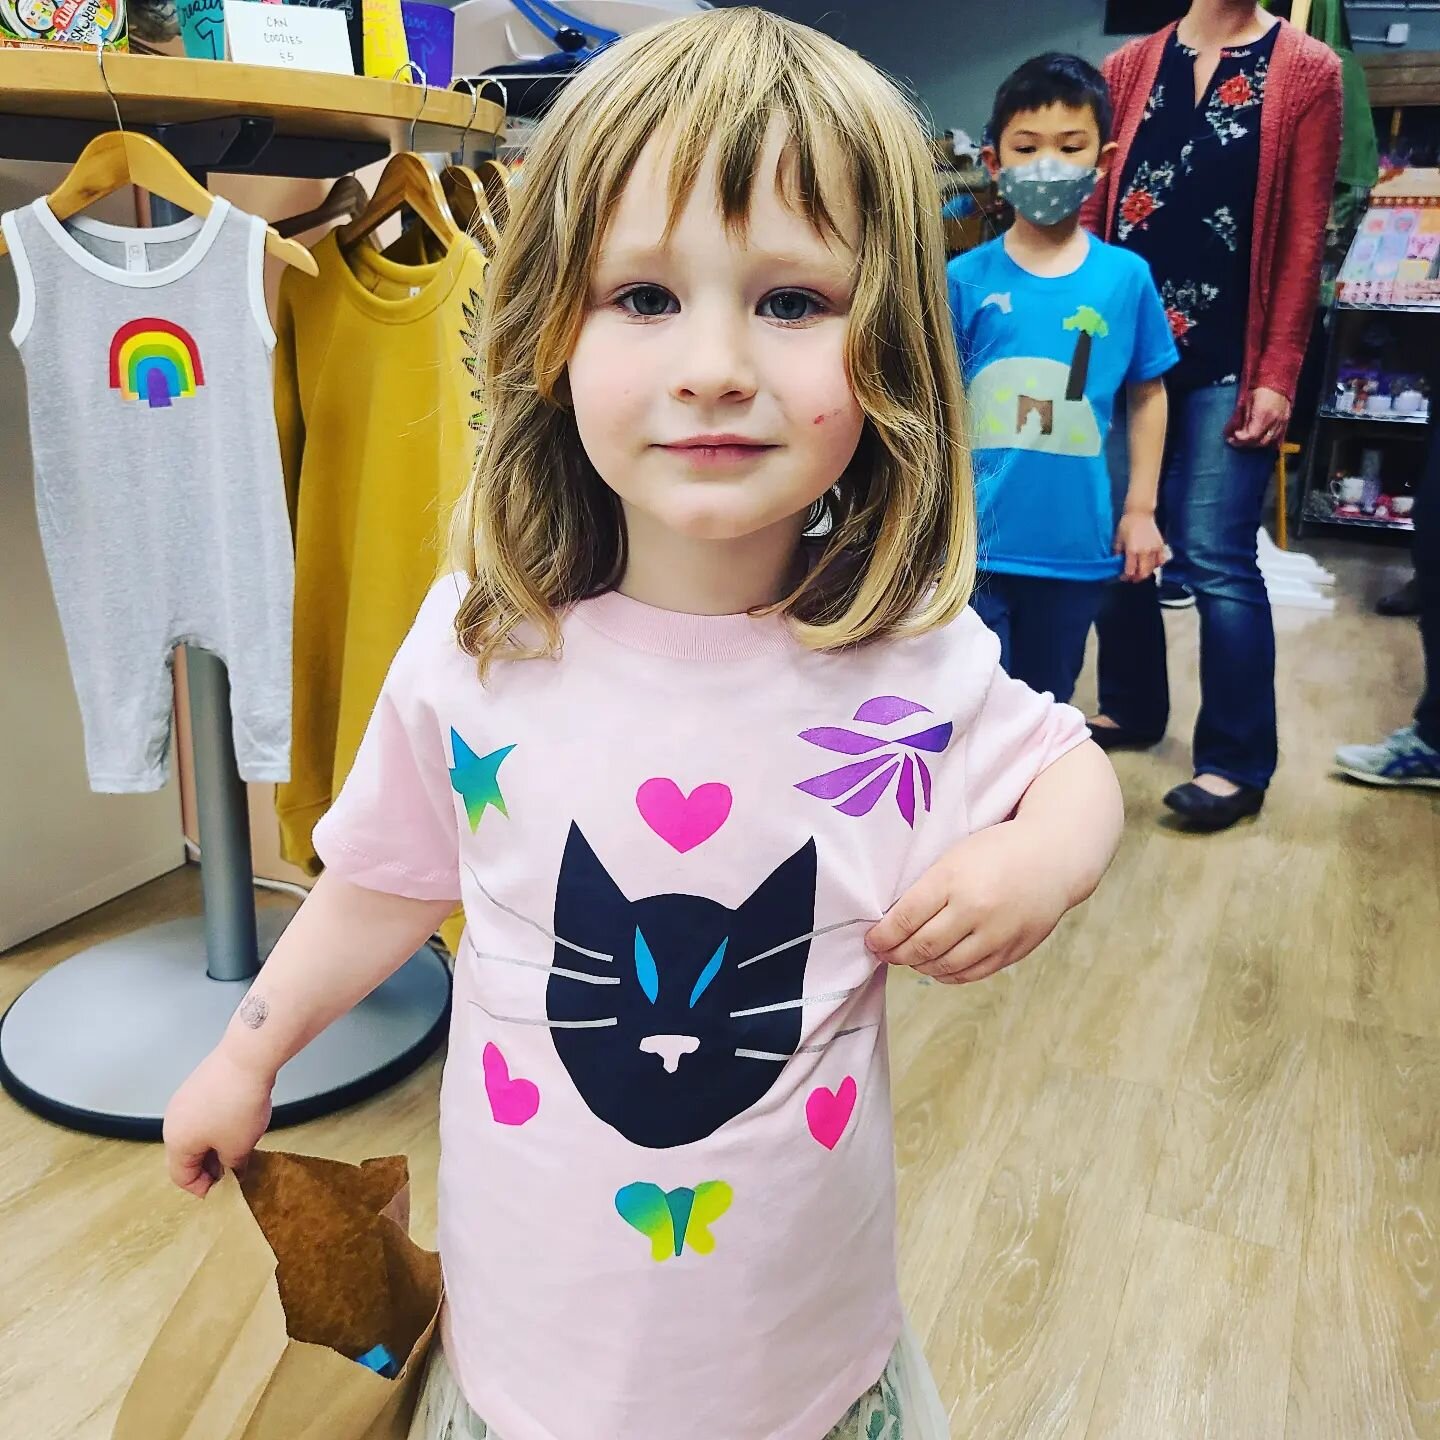 Time to share some creative fun from our sweet birthday parties the past few weeks! Check out all the CreativiTee! ♡♡♡
.
#birthdayparty #birthdayfun #partytime #creativeparty #create #design #tshirtparty #kidparty #creativespace #kidfun #makeashirt #